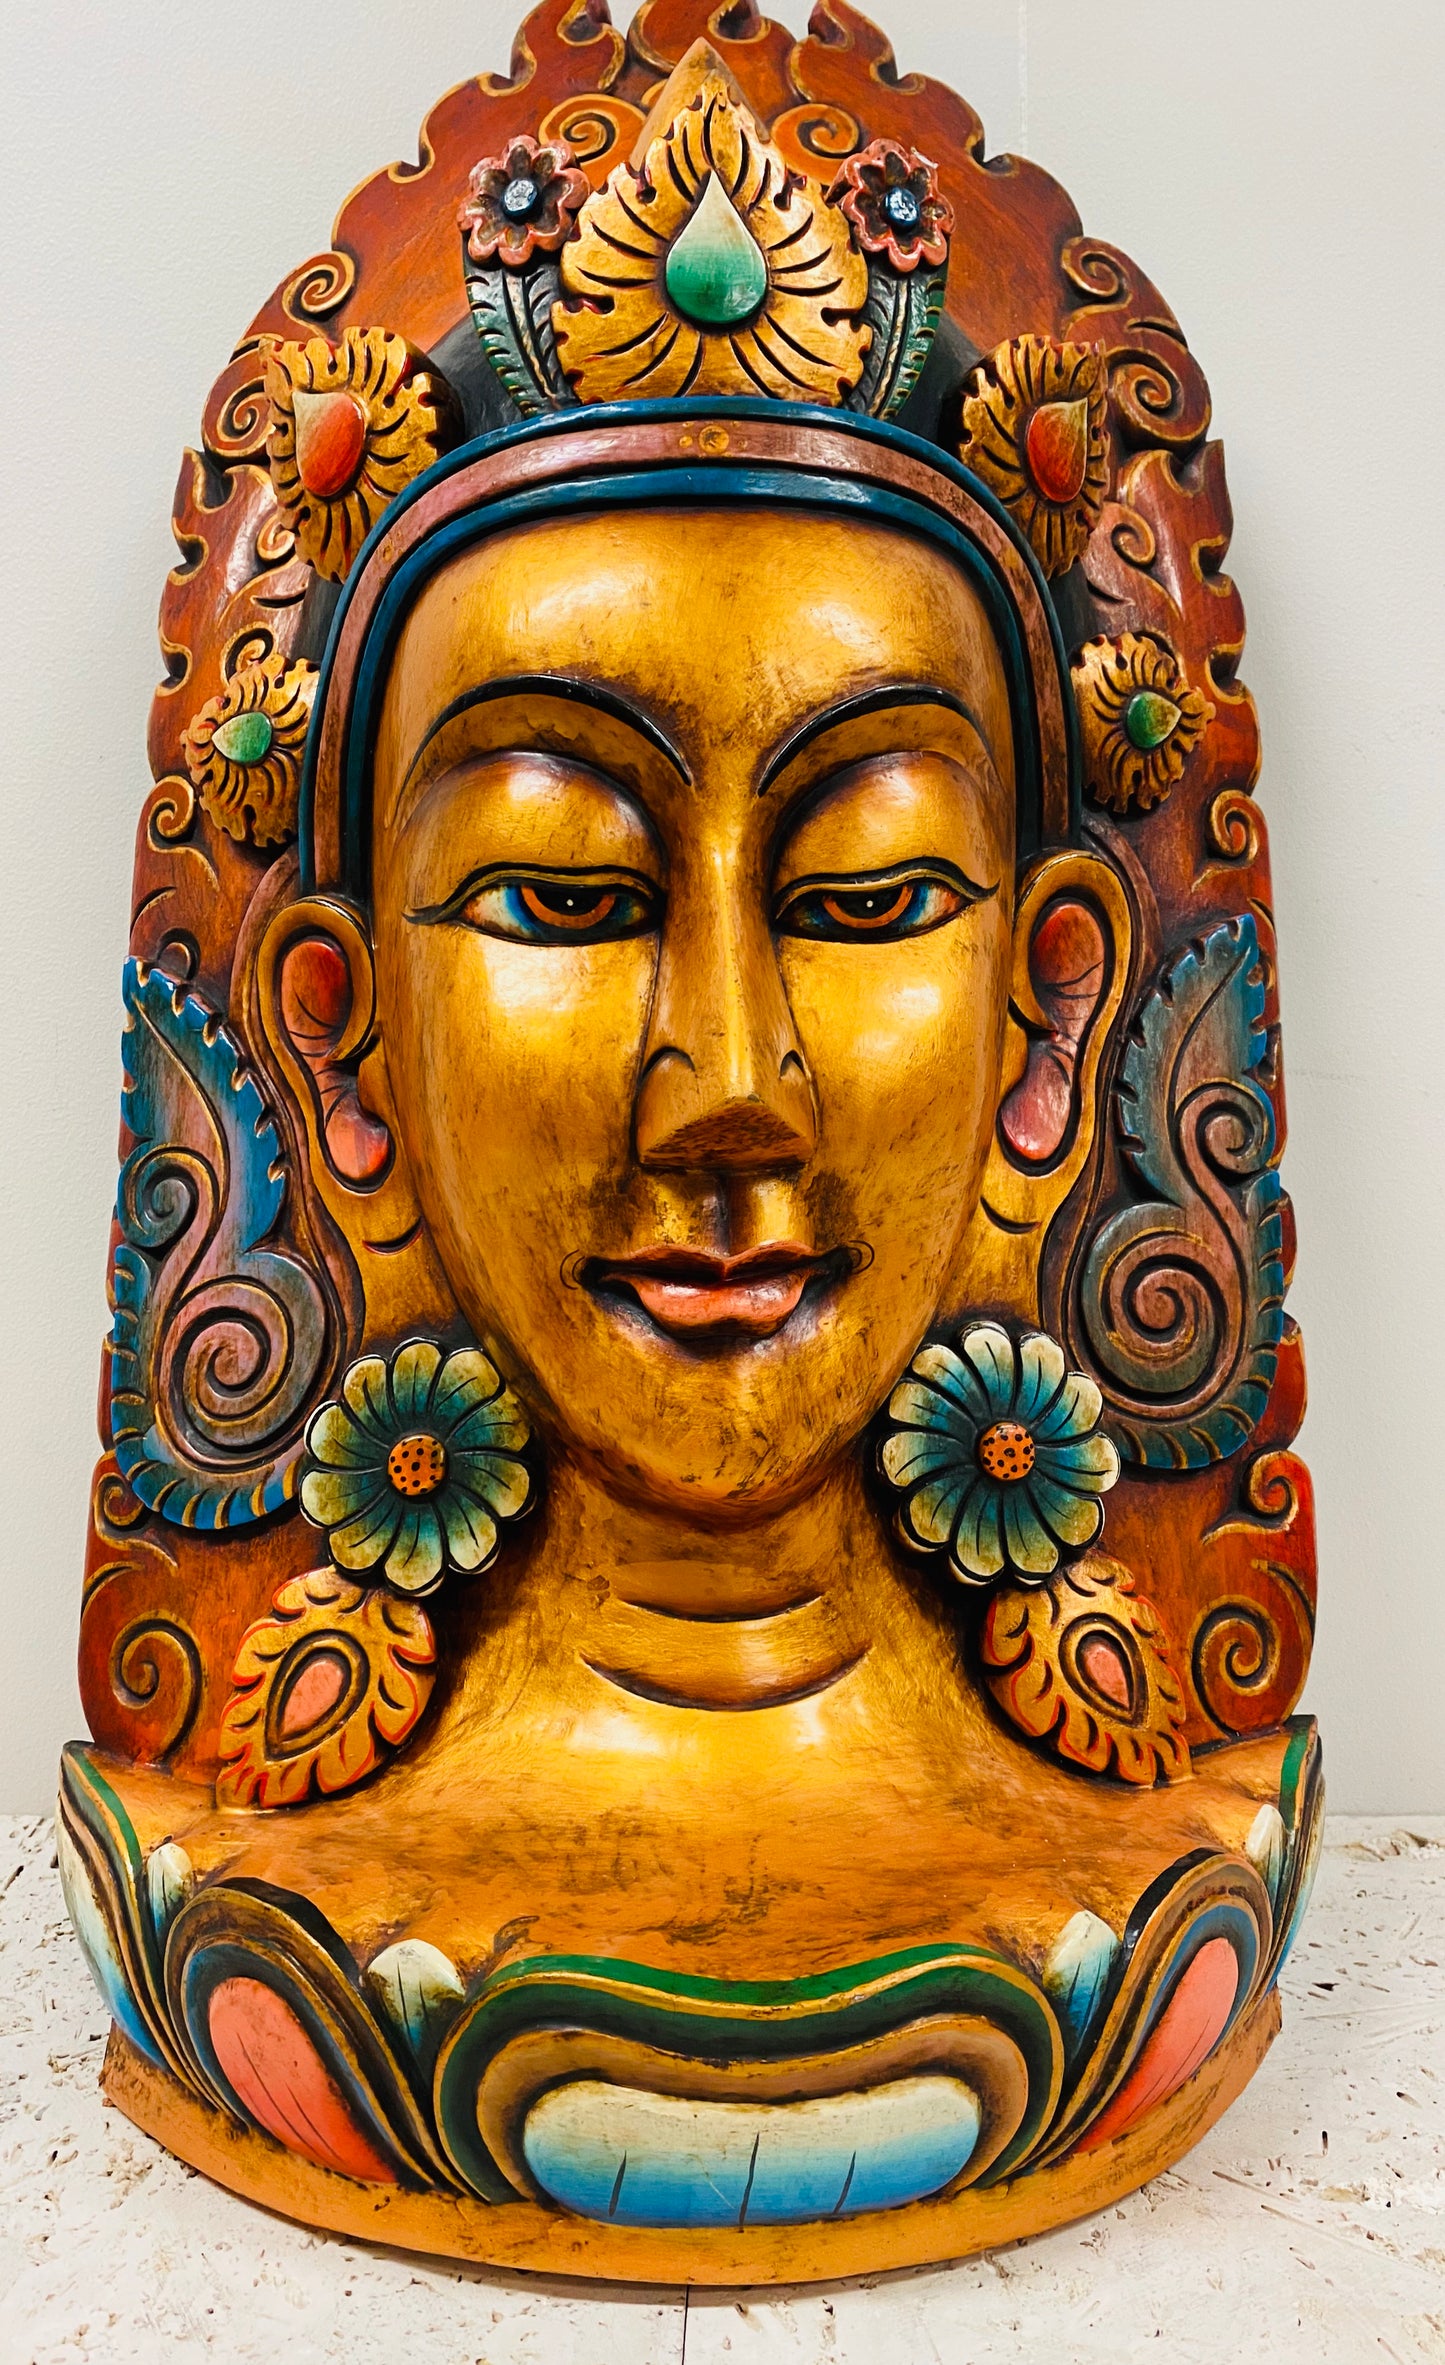 Hand Carved and Painted Goddess Green Tara Mask From Nepal 31" x 15"